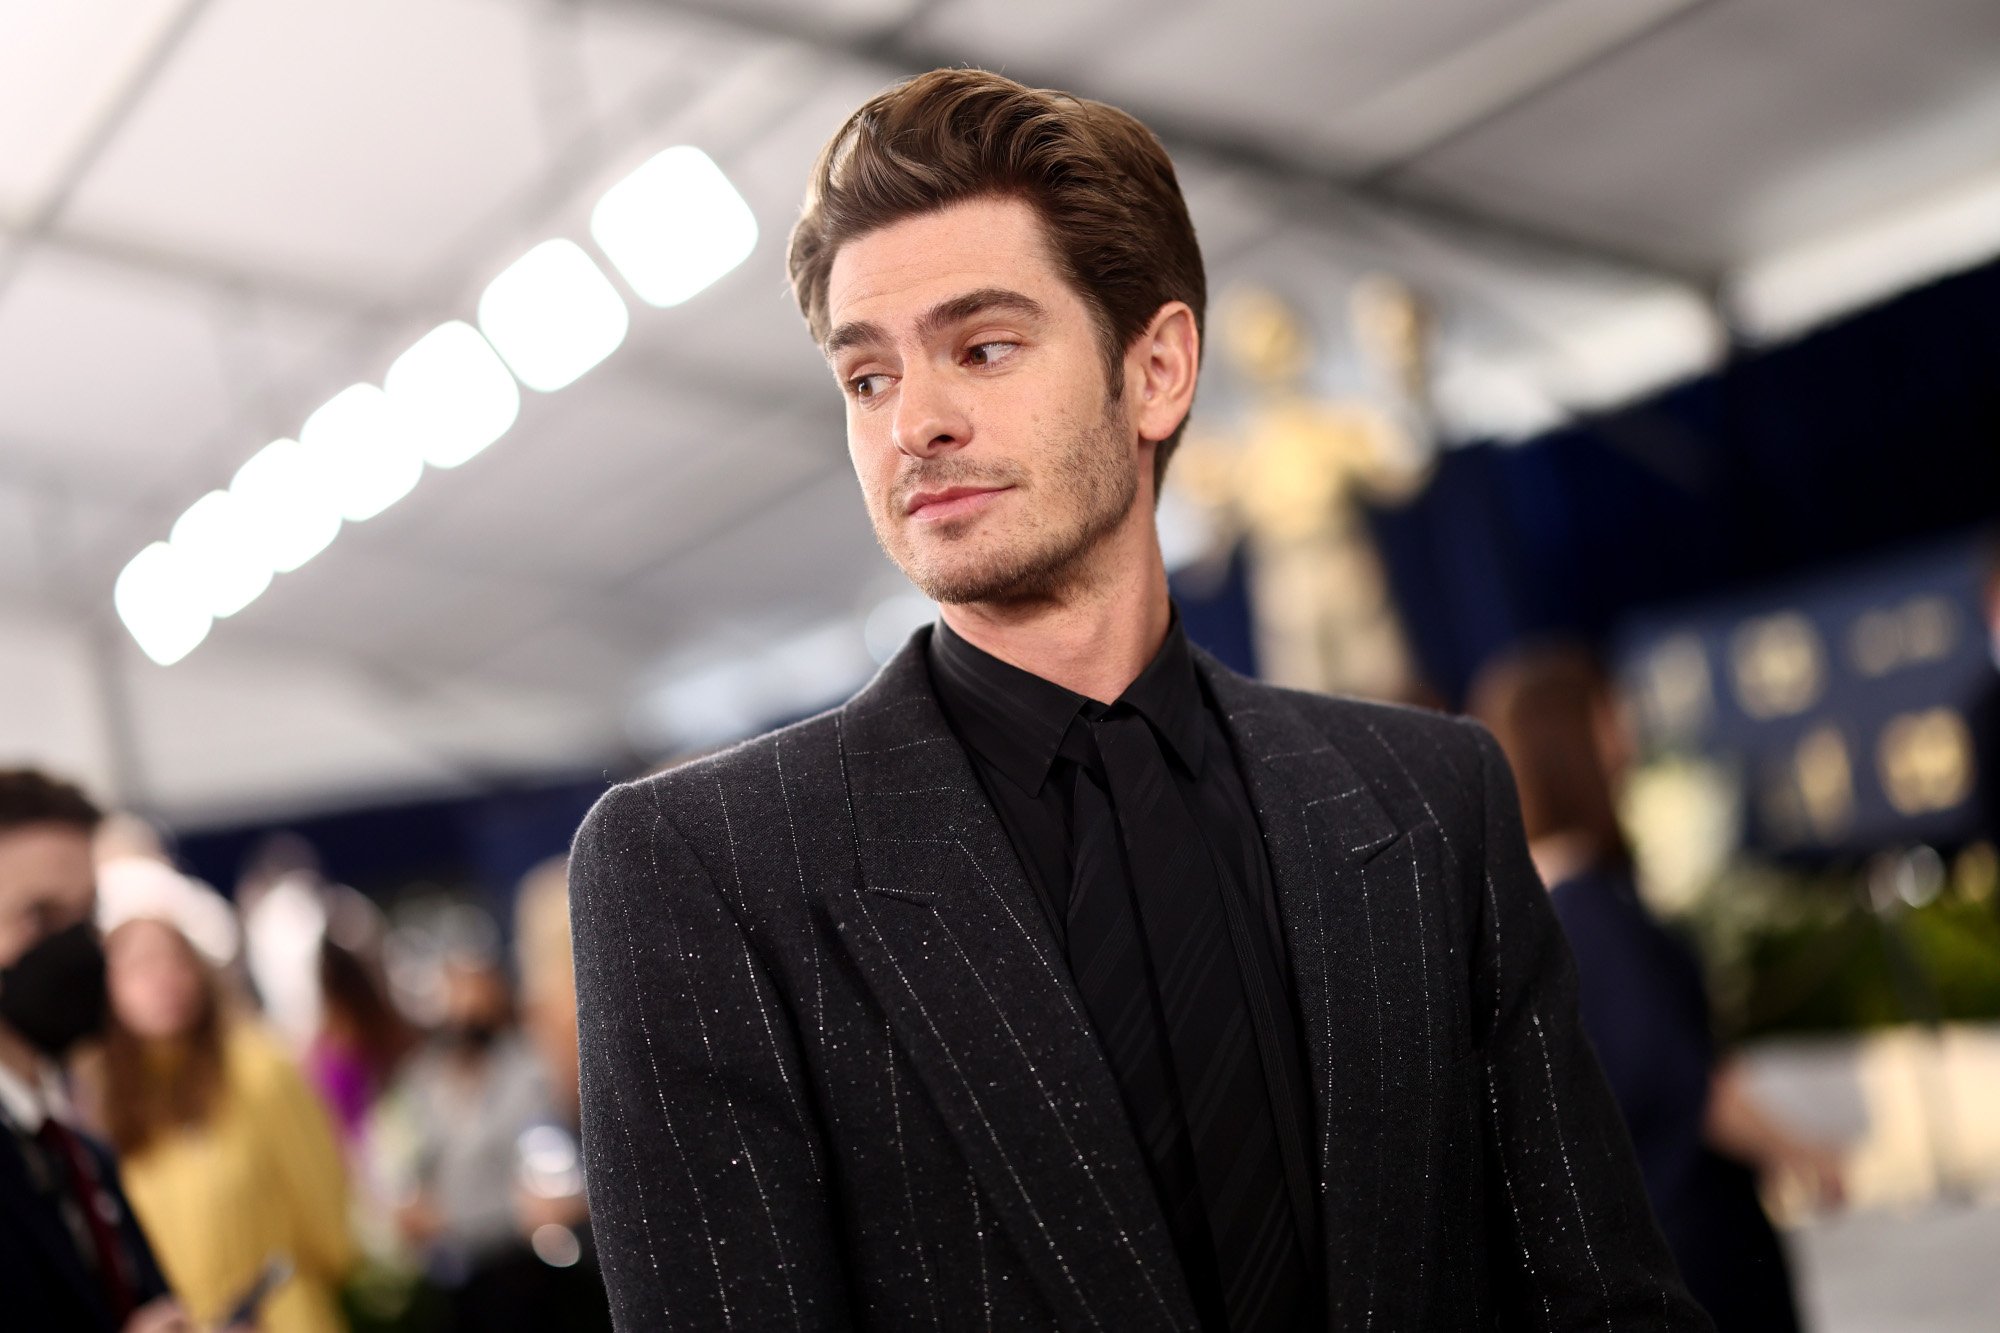 'Spider-Man: No Way Home' star Andrew Garfield attends the 2022 SAG Awards. He's wearing a black shirt and suit and looking to the side of the camera.